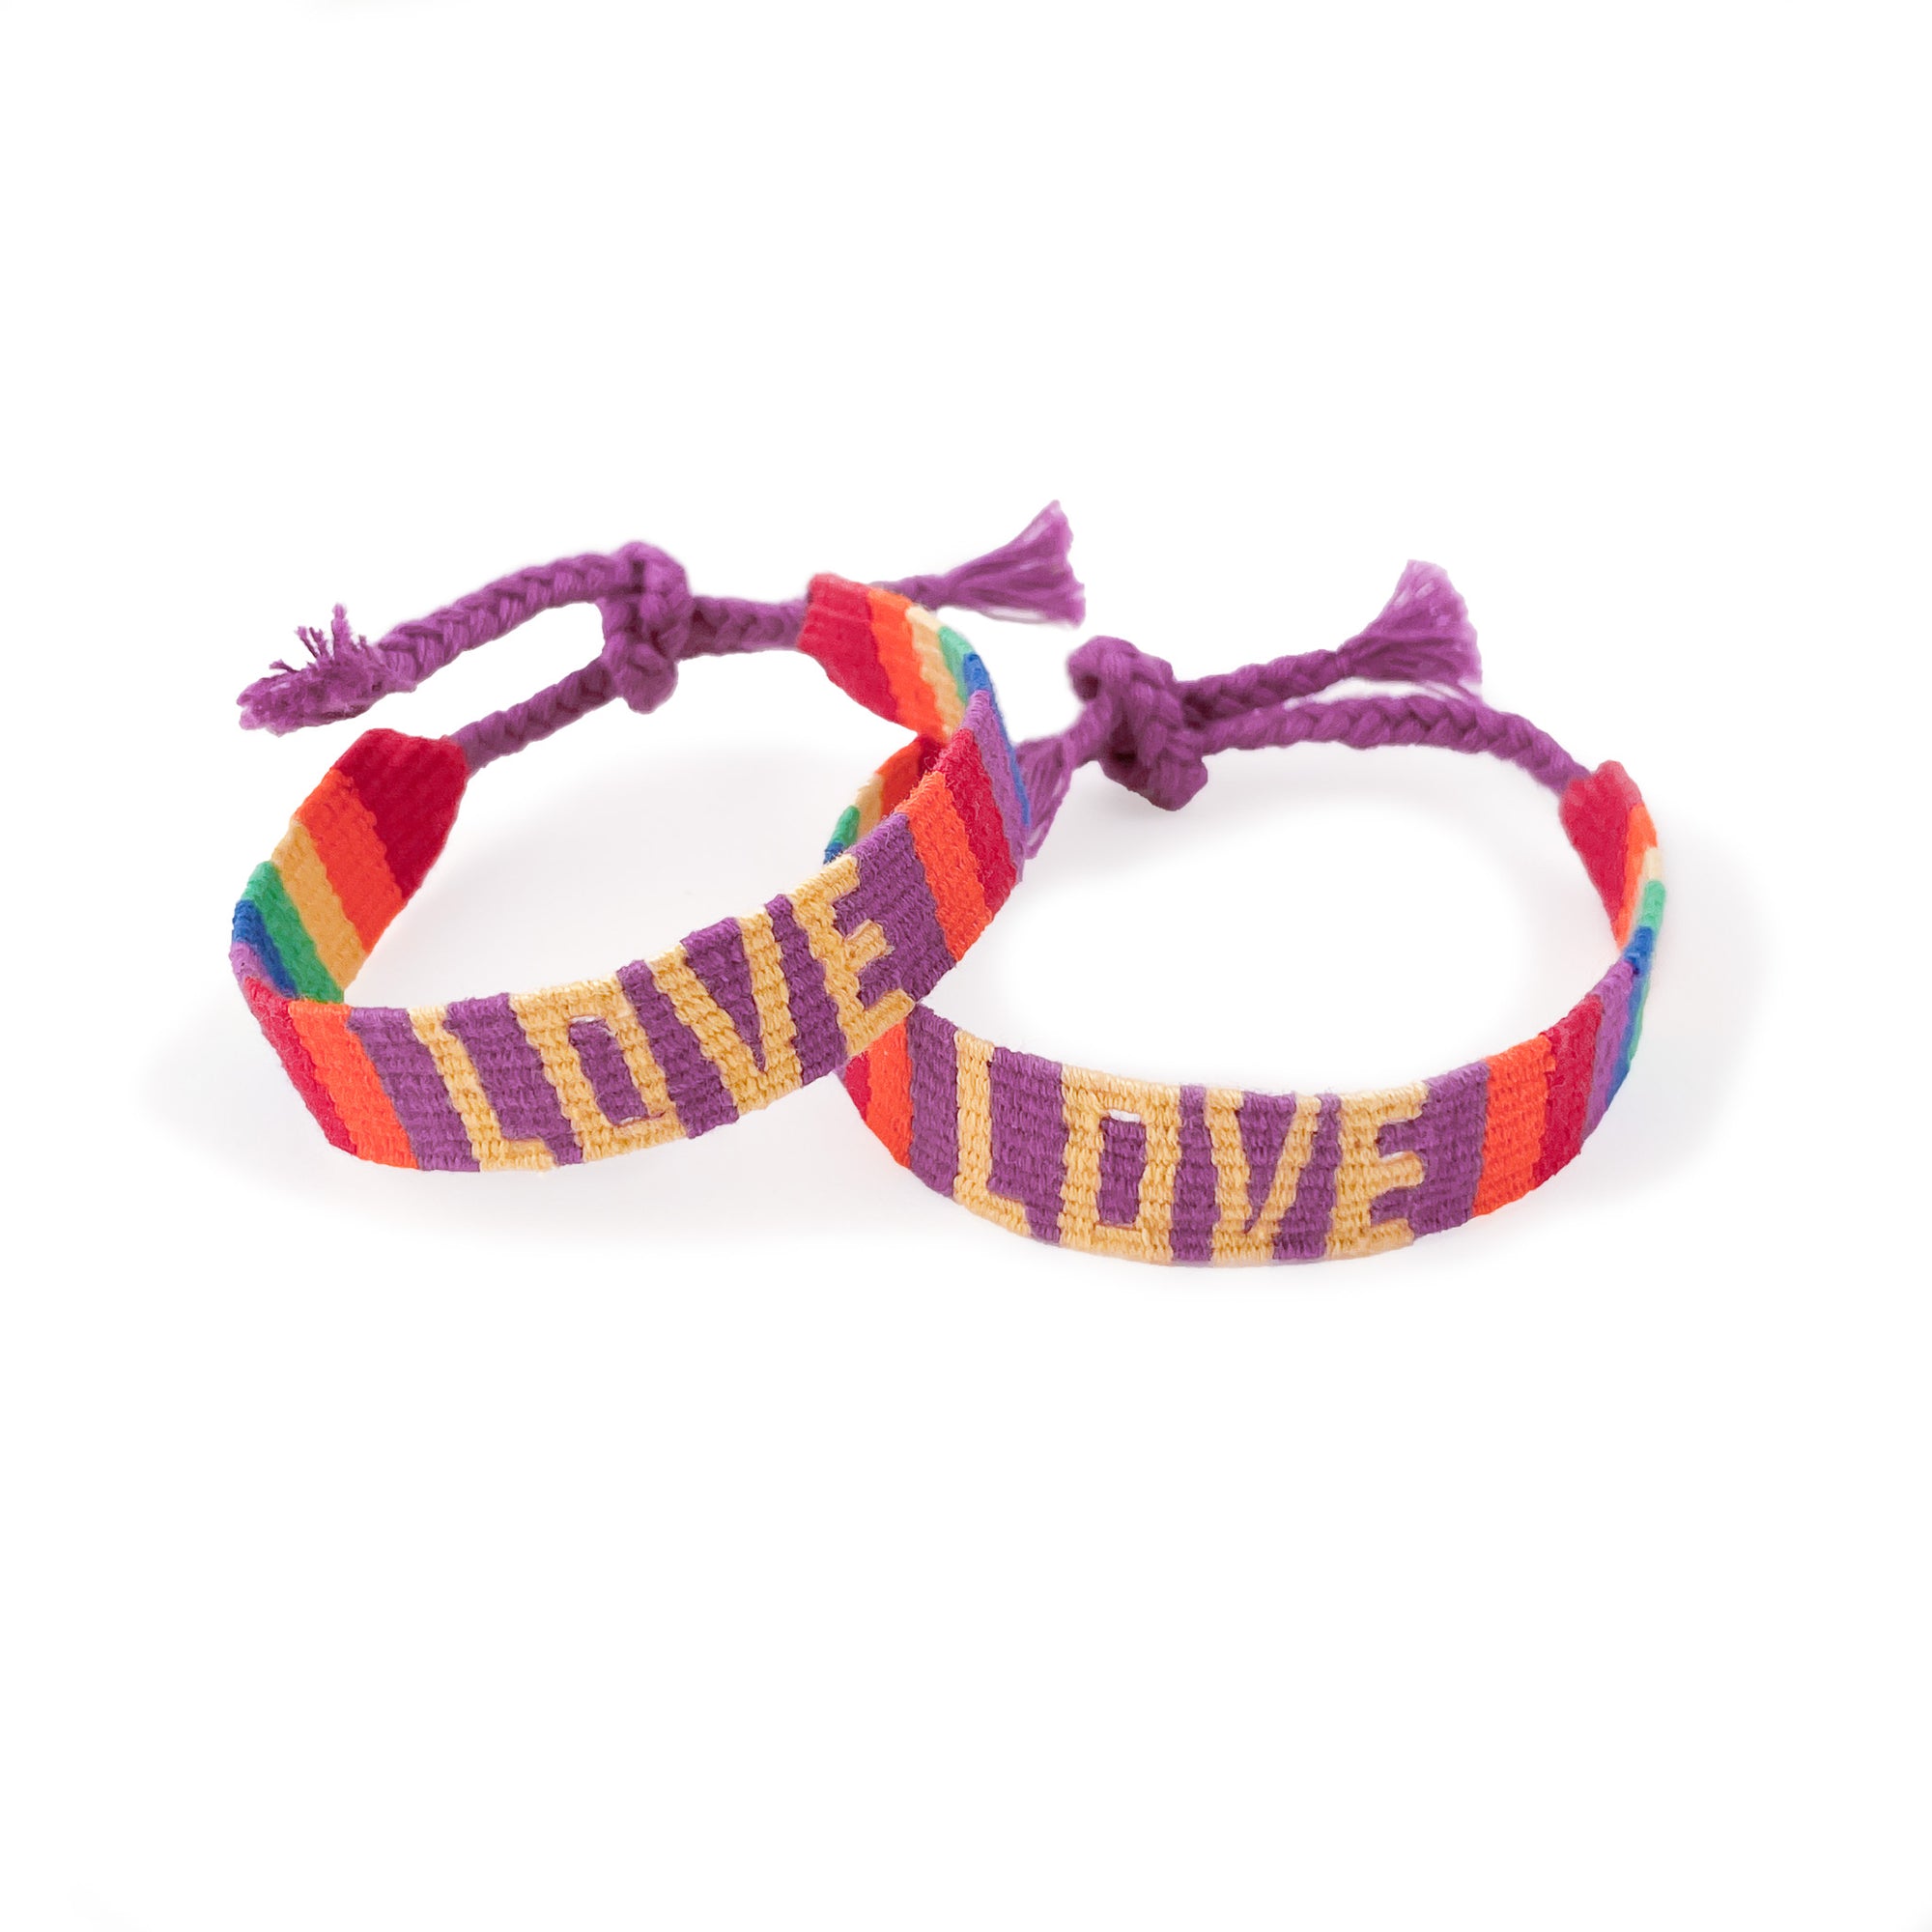 Two friendship bracelets, with the word LOVE in pale yellow over a purple background with color block rainbow stripes and purple ties